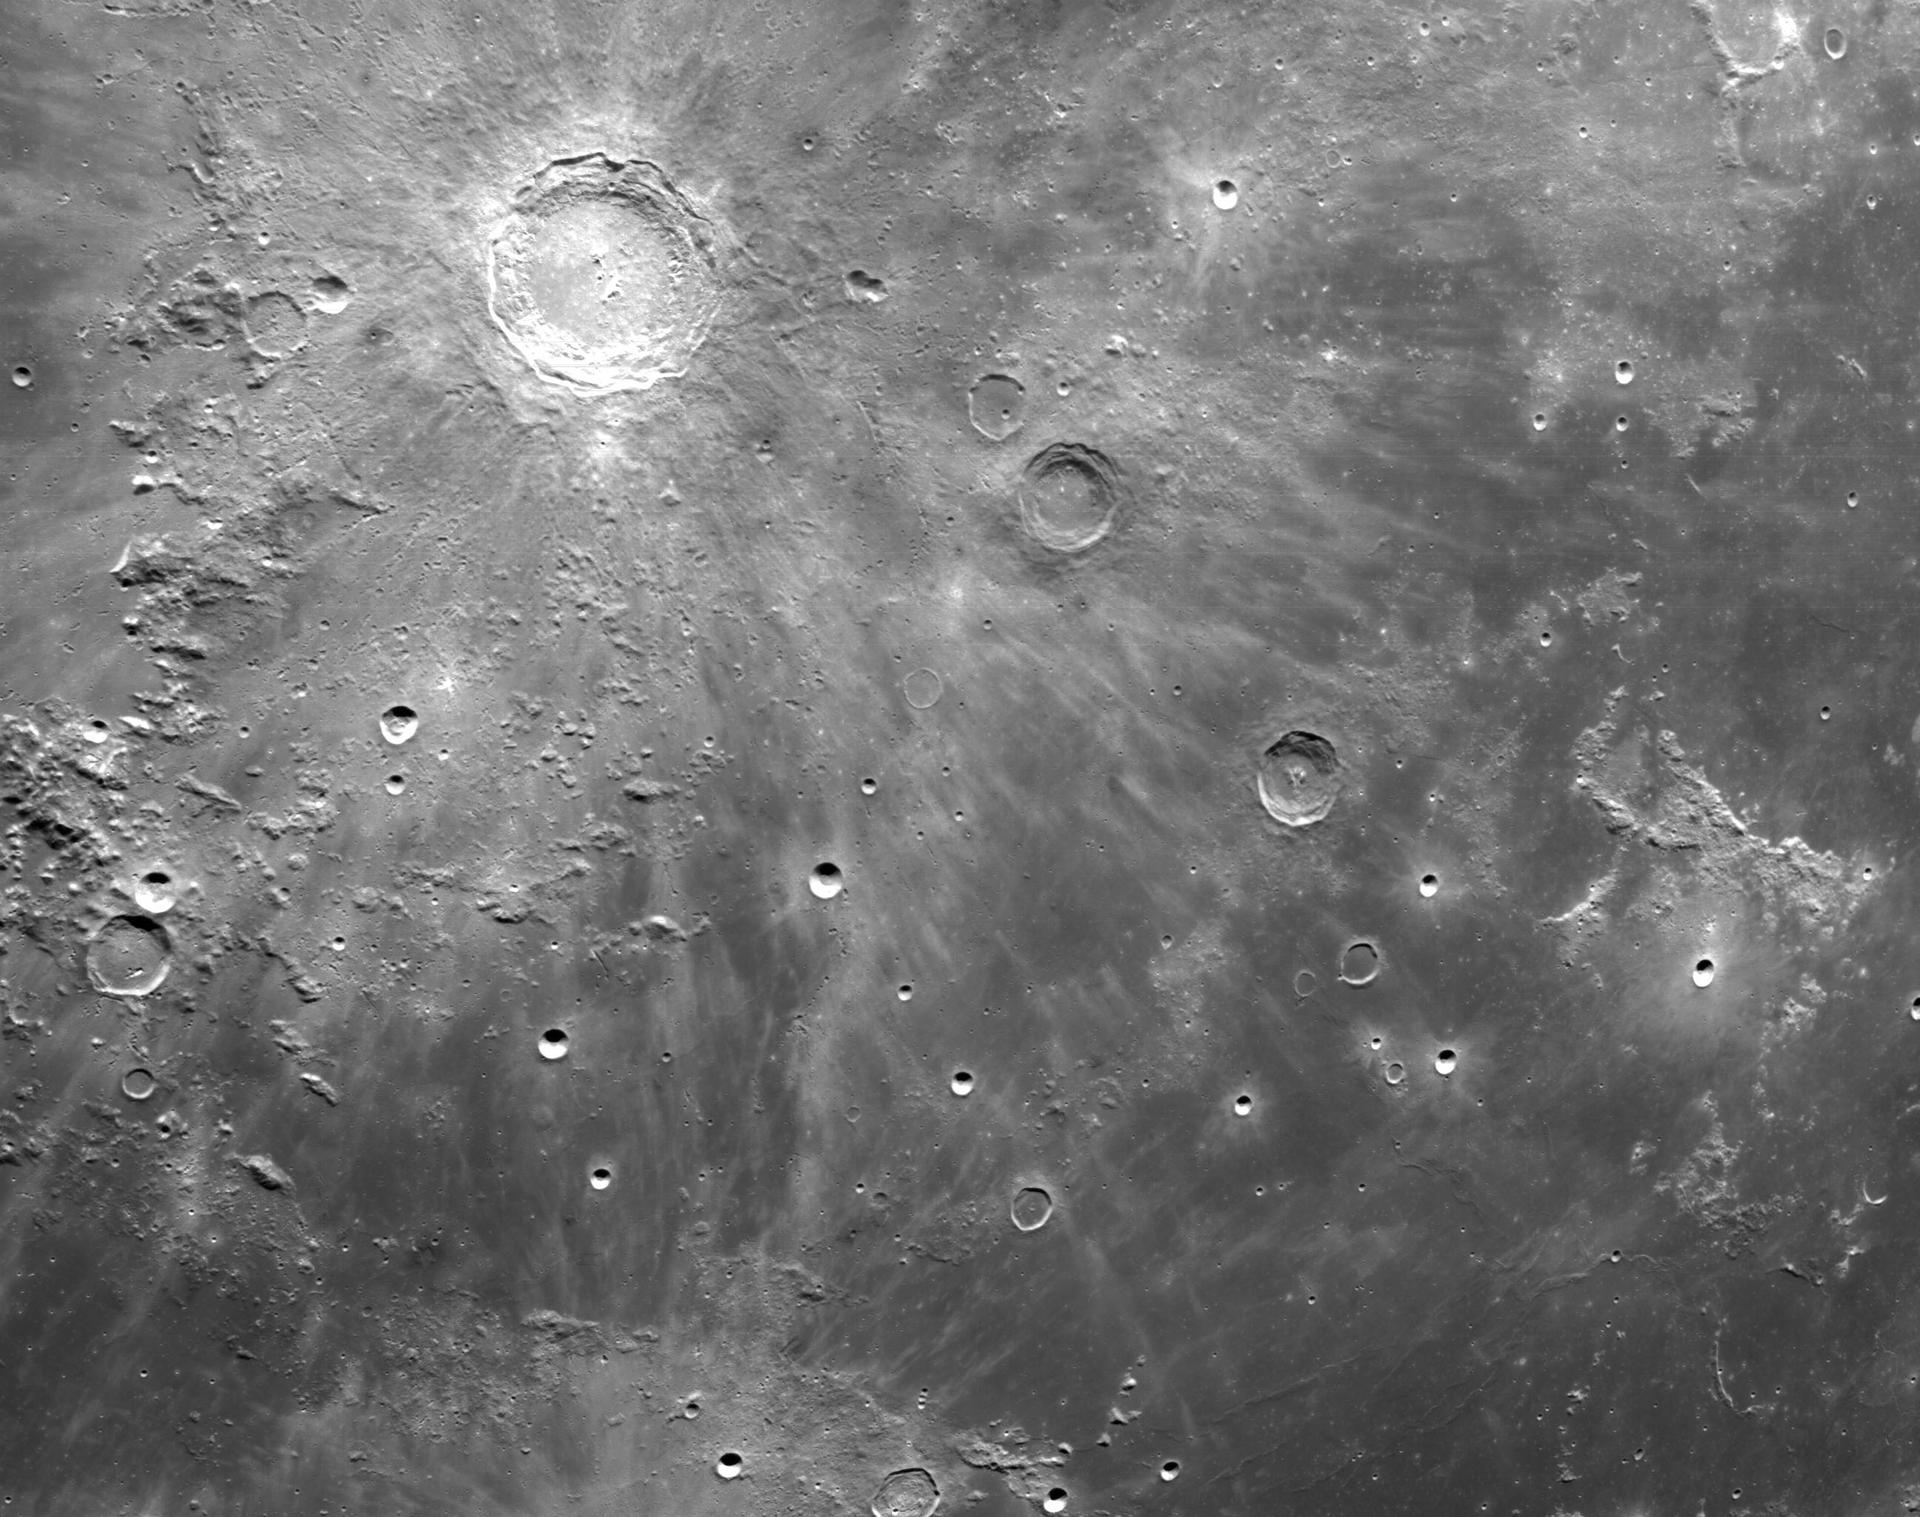 A close-up of the moon as seen from the Orion spacecraft during the Artemis 1 mission.